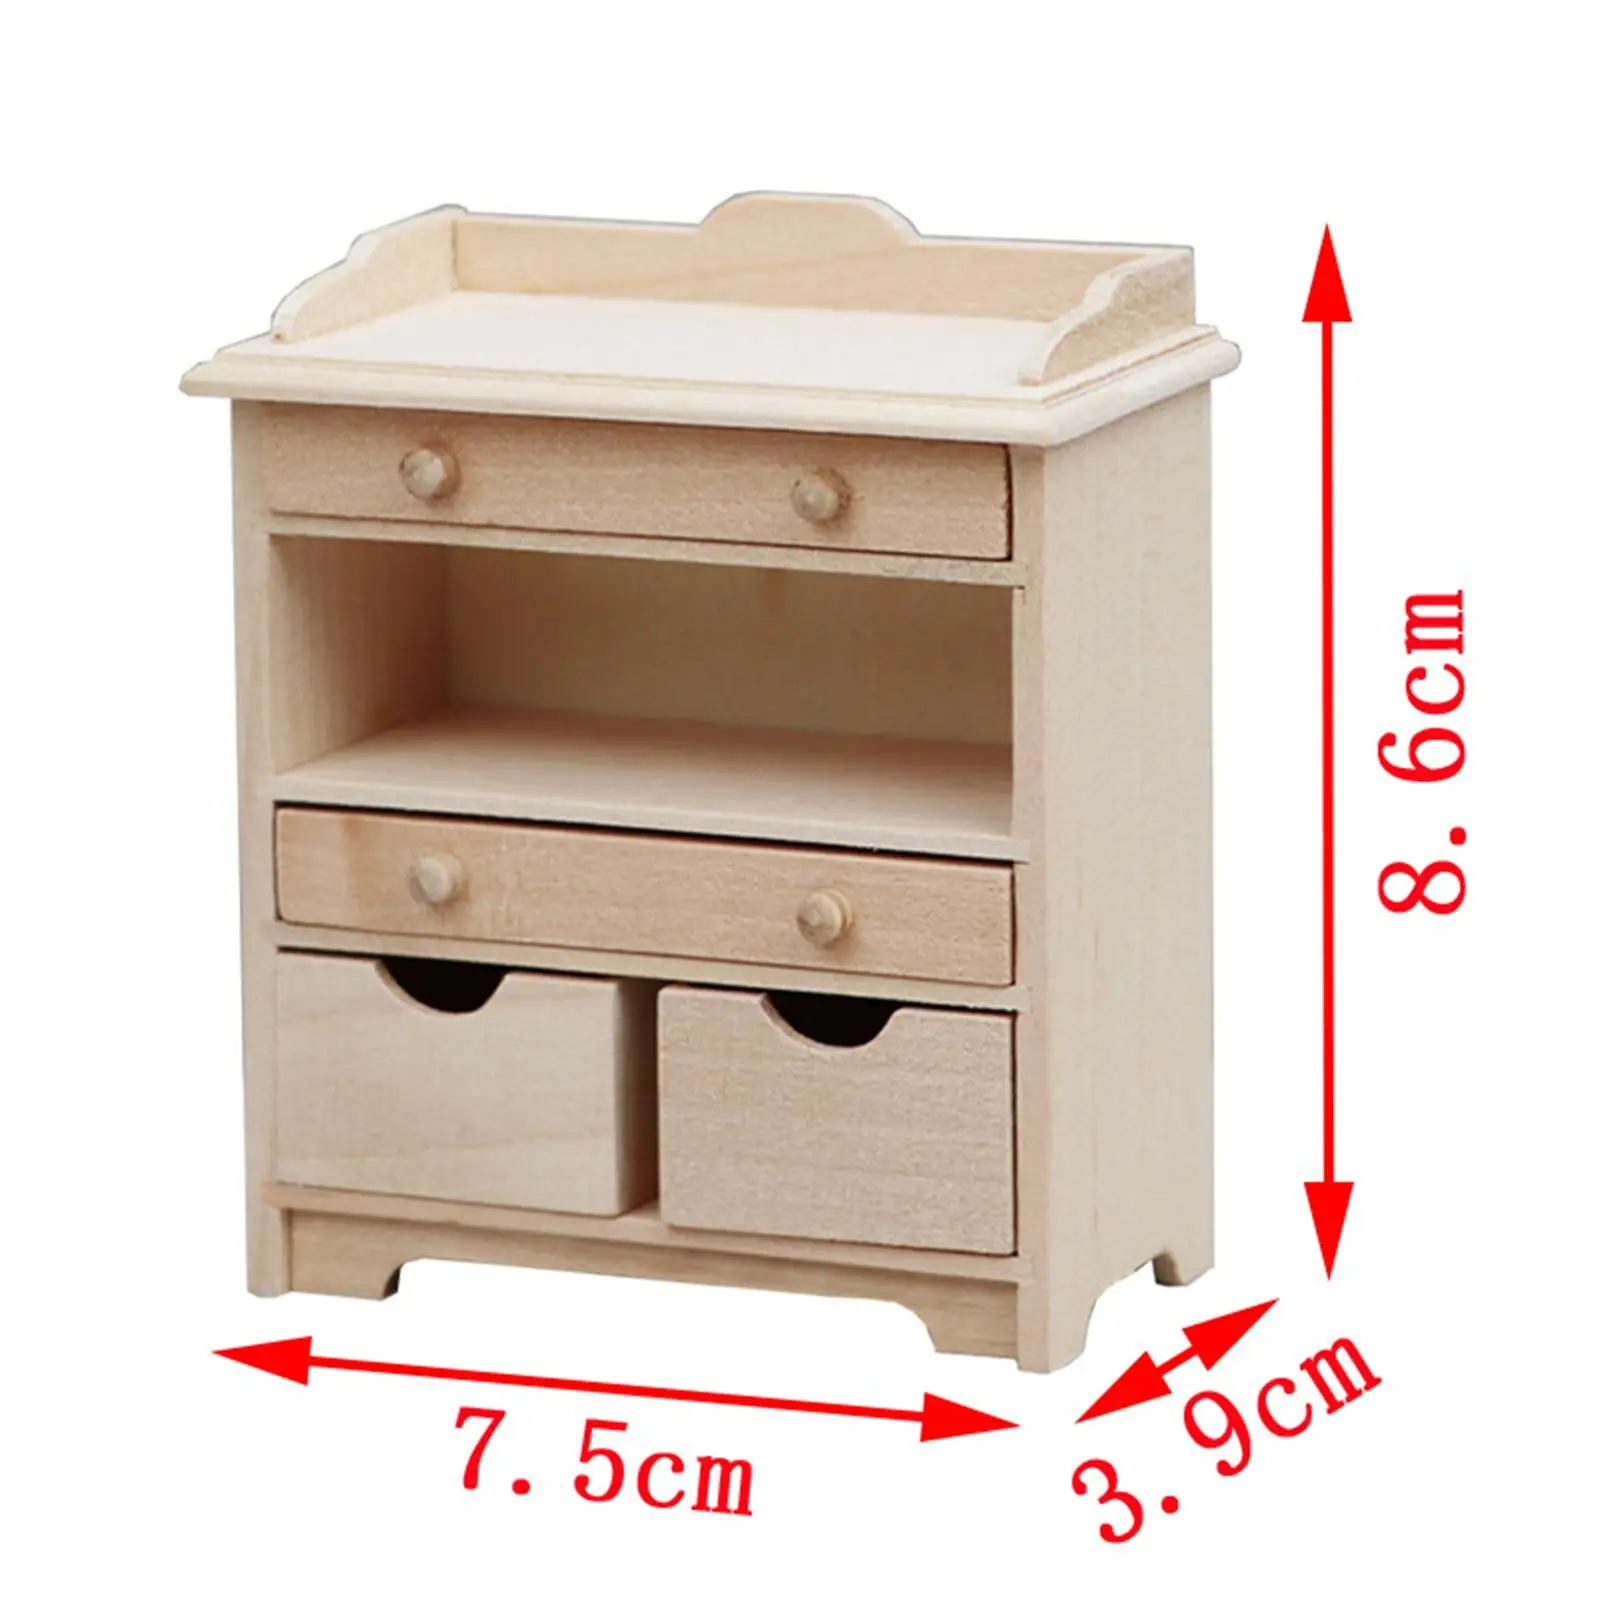 1:12 Dollhouse NightStand Model with 4 Drawers Wood Furniture Mini Bedside Tables for Decor Pretend Play Accessory DIY Projects